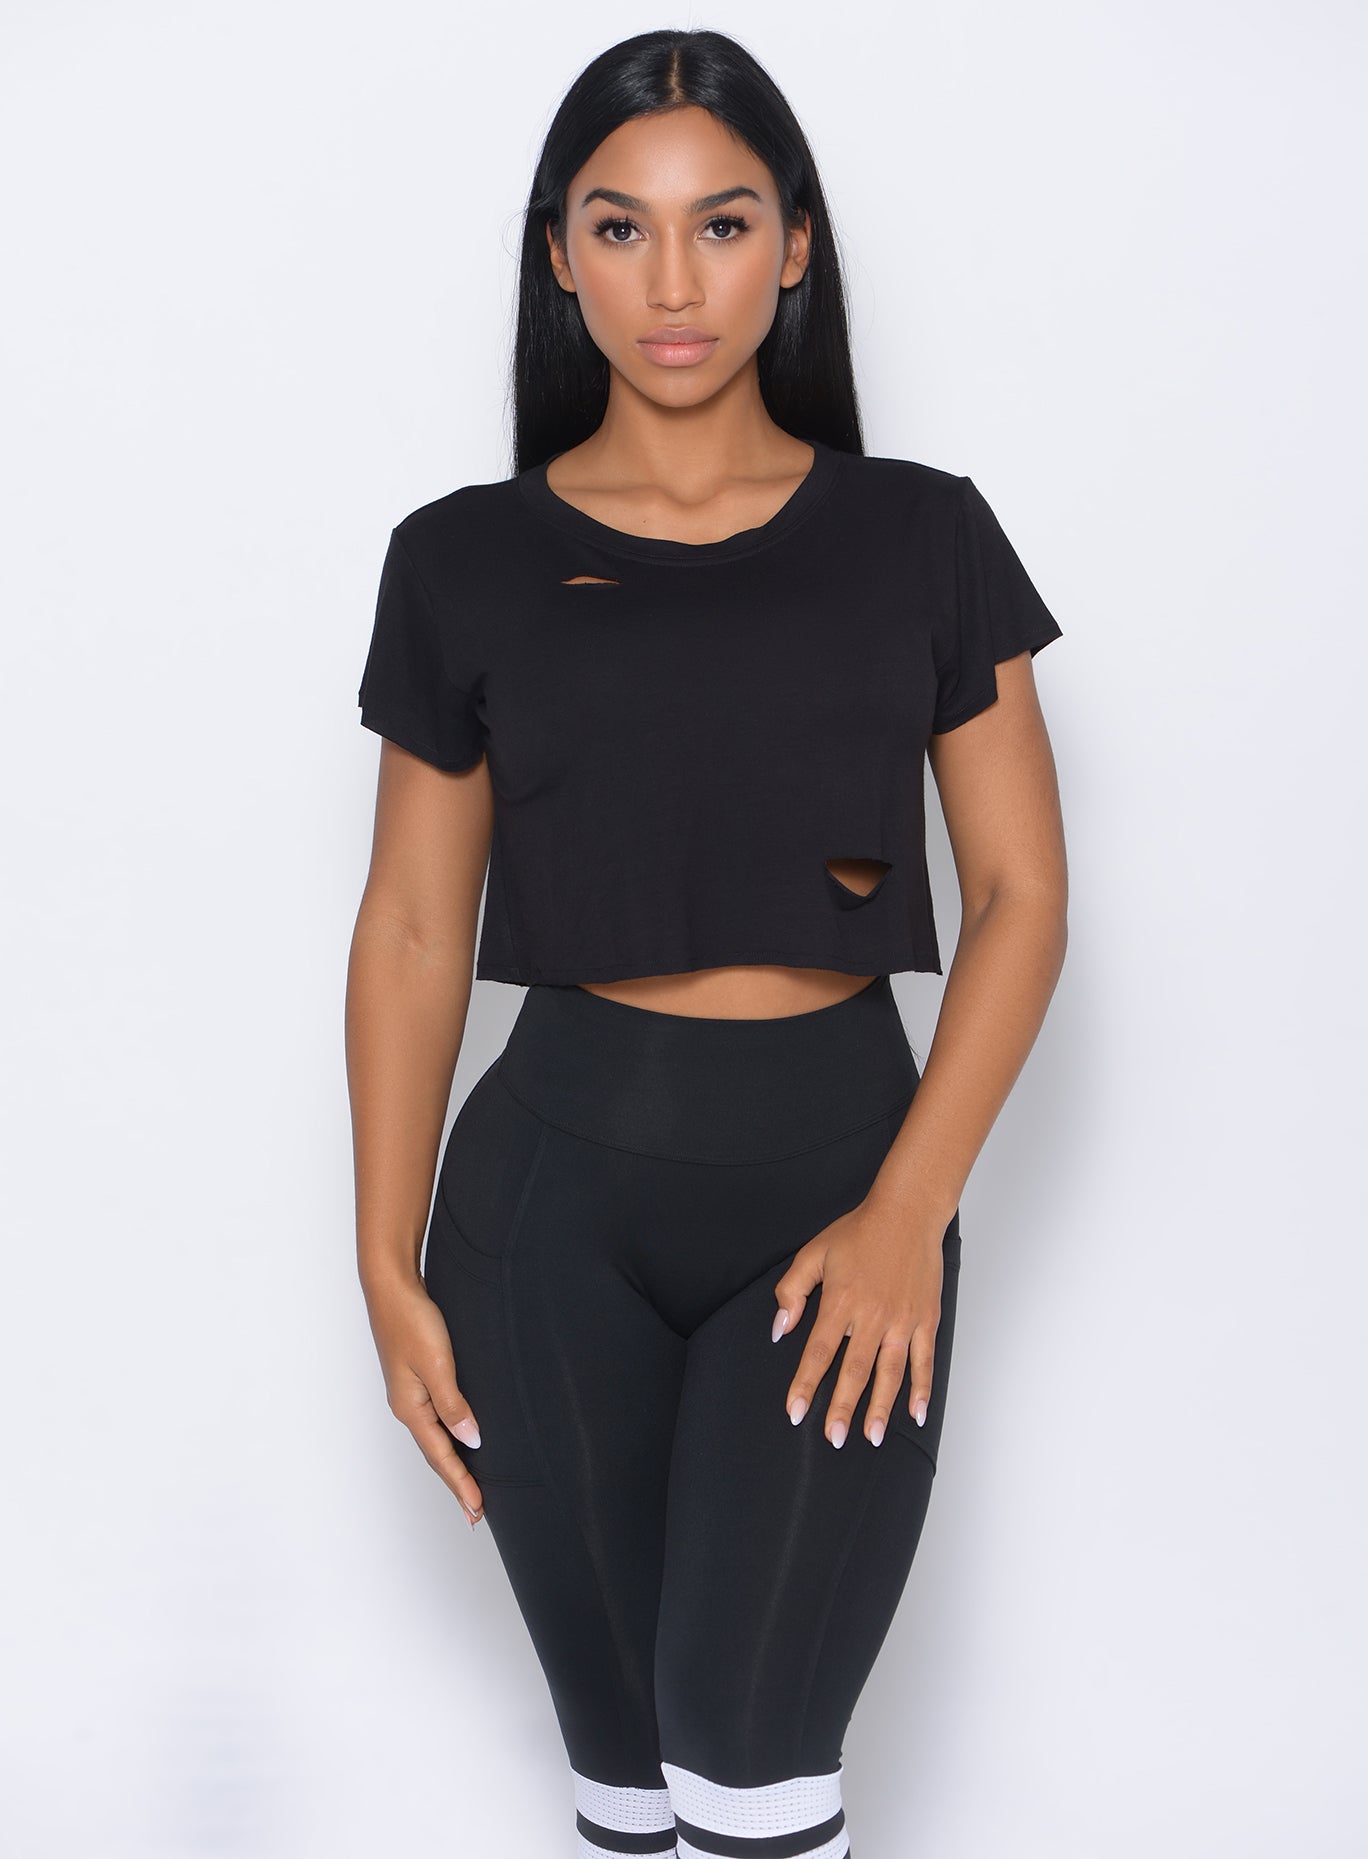 Front profile view of the model in our black shredded tee and a matching leggings